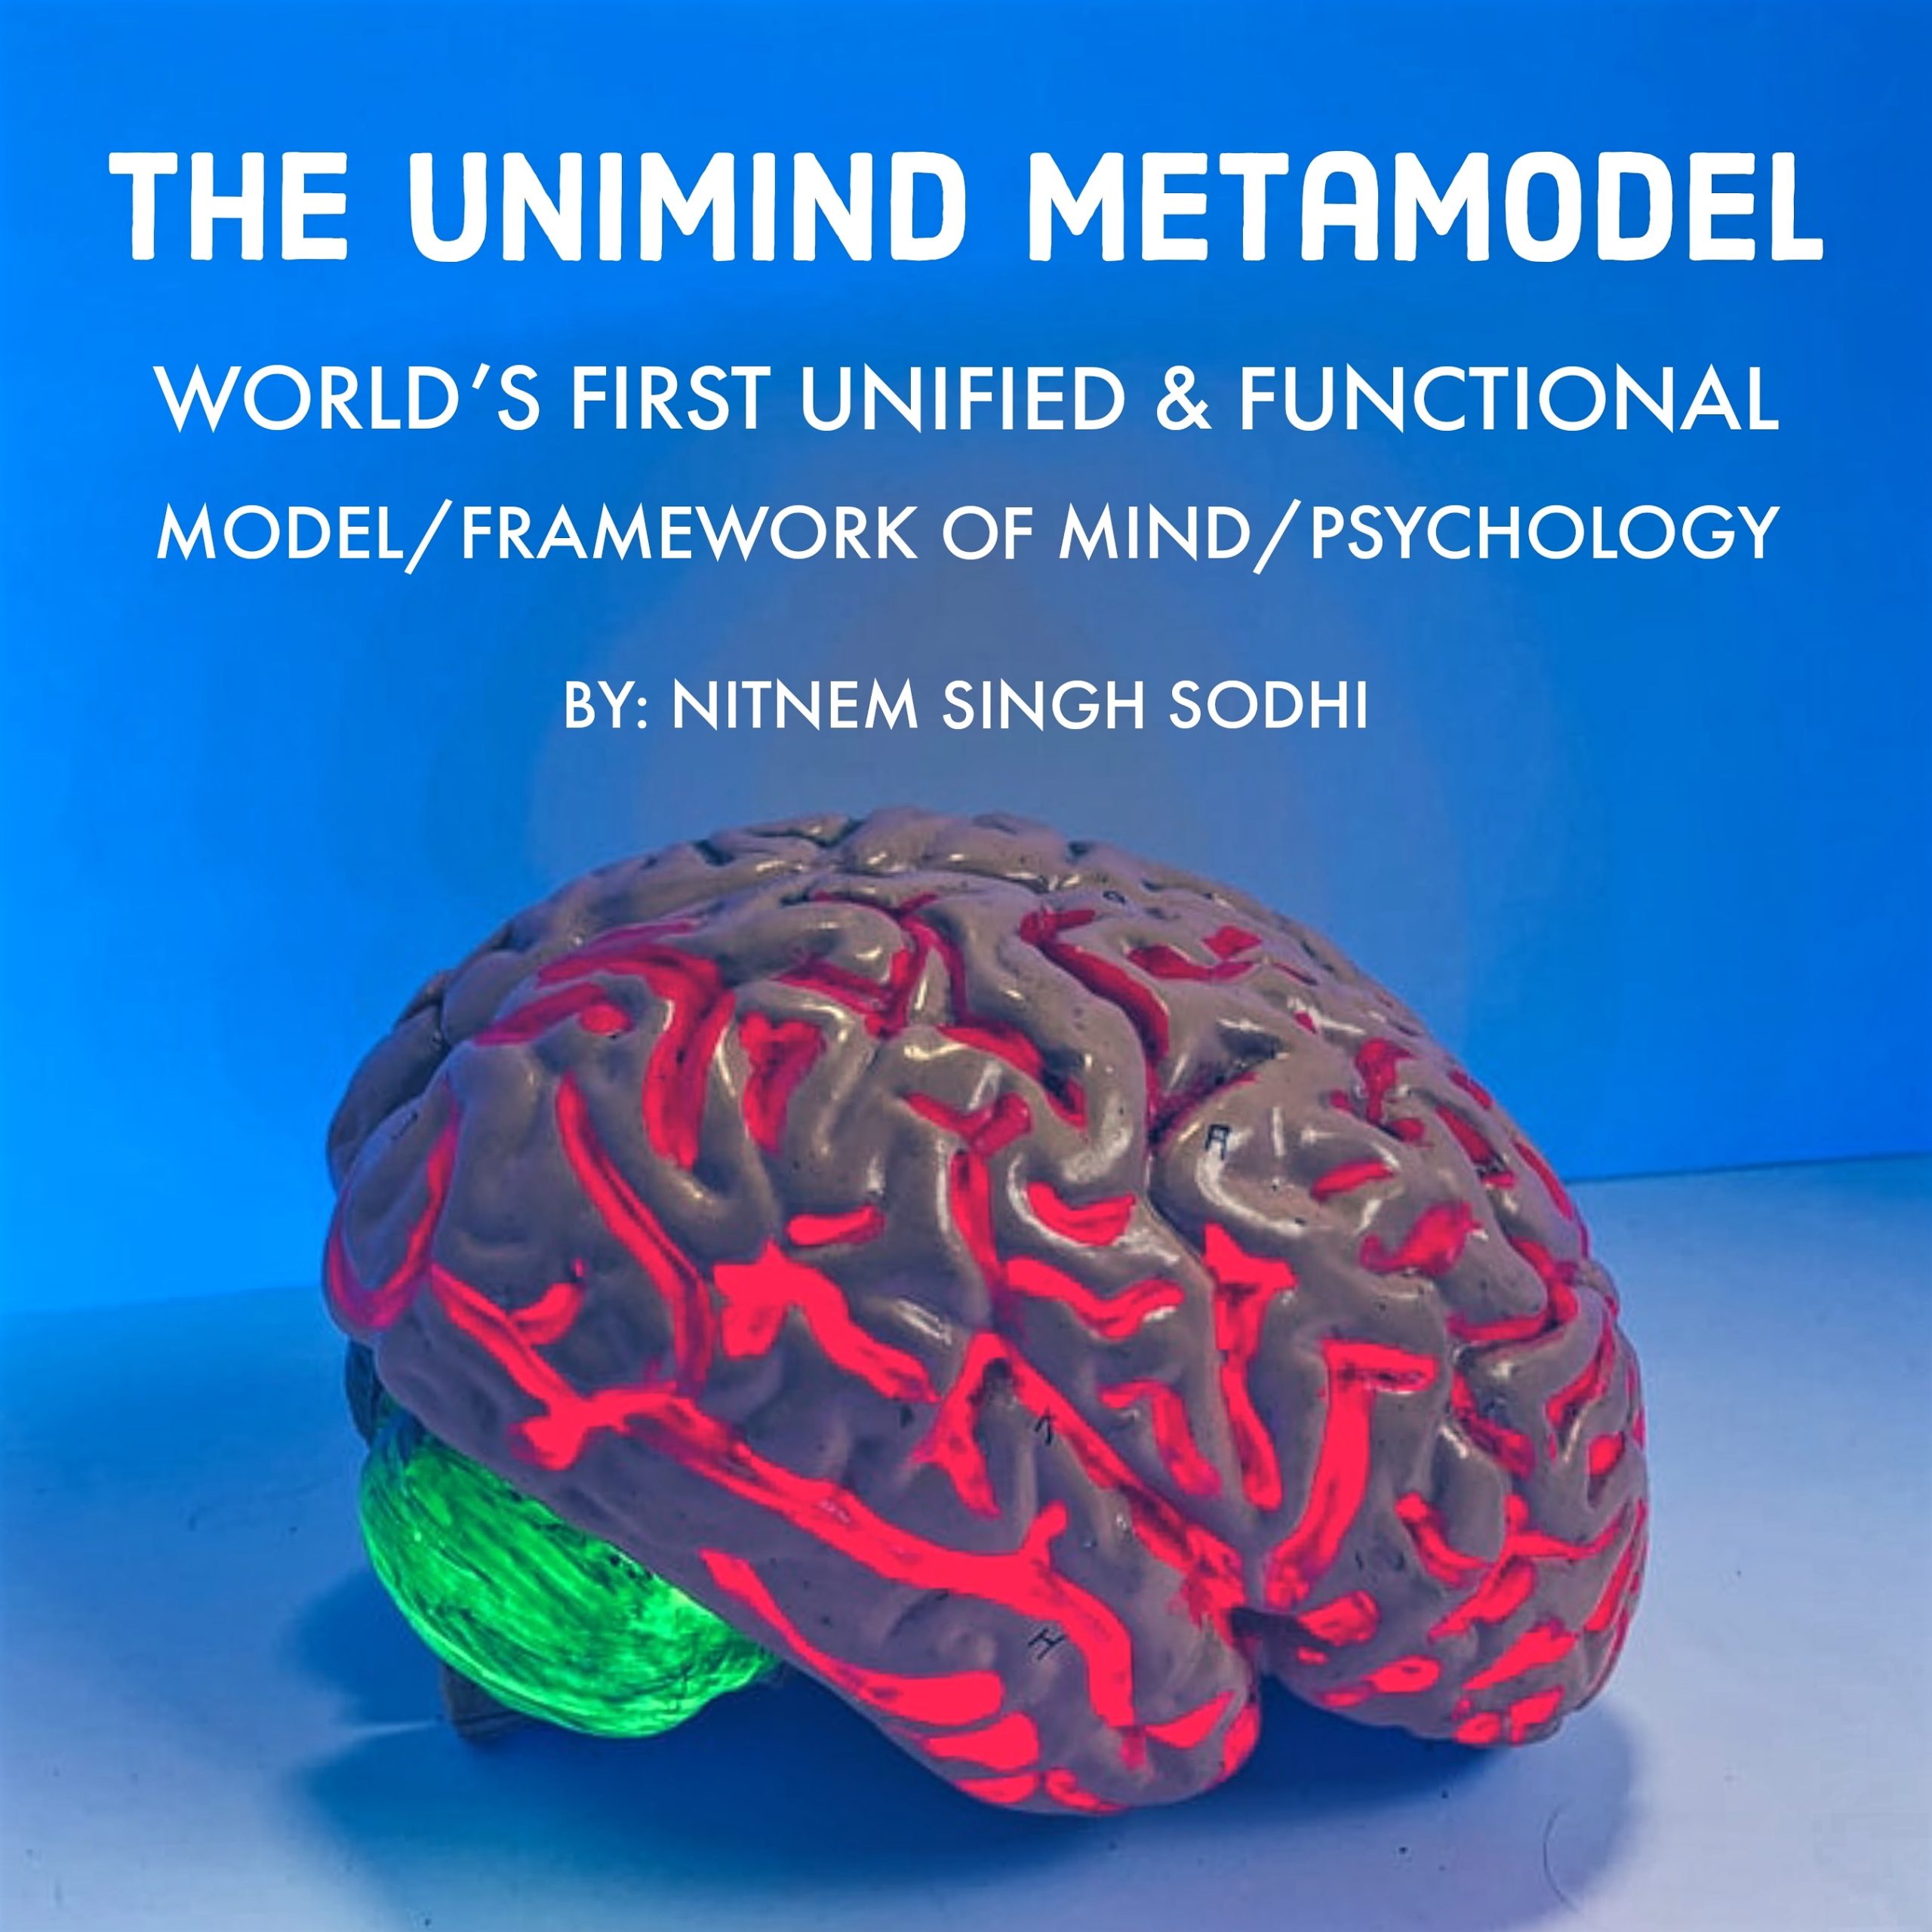 A revolution in field of psychology - The Unimind Metamodel